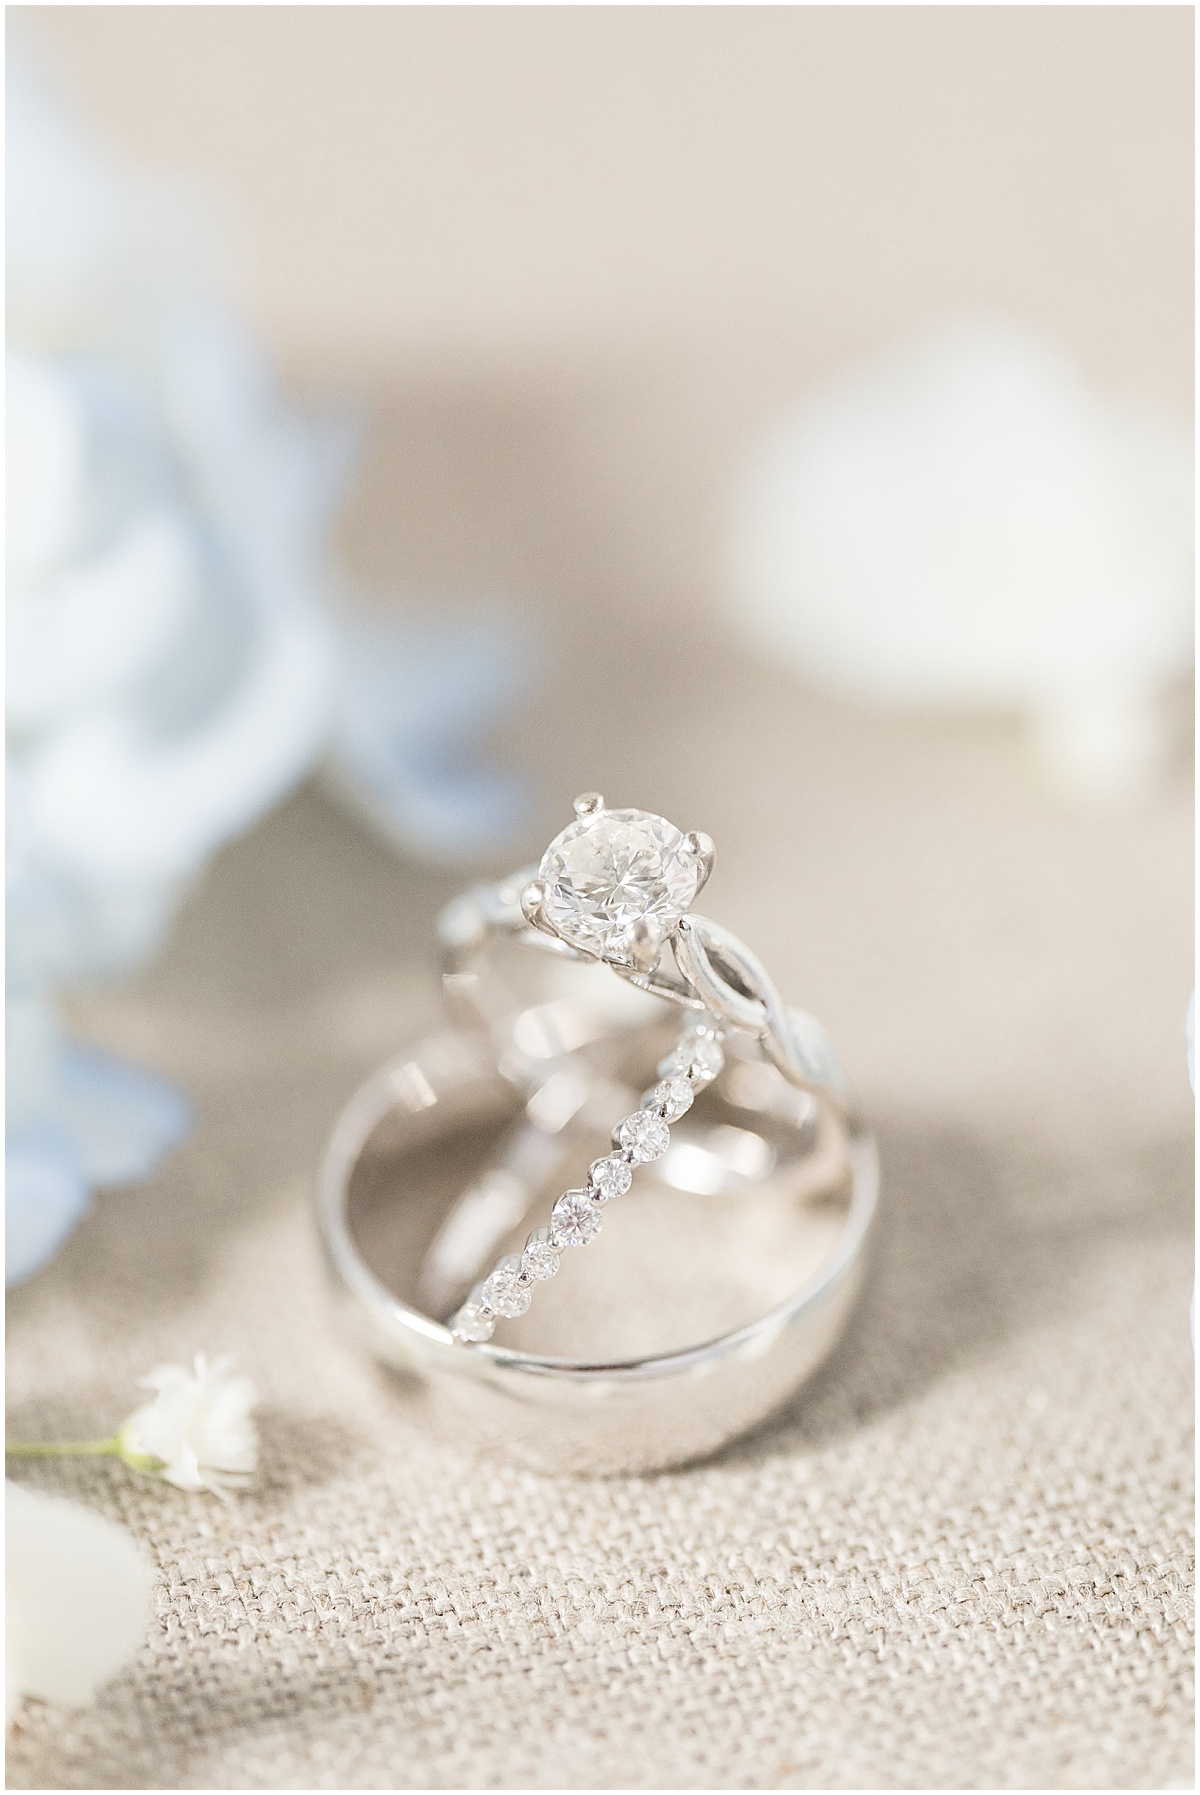 Bridal details for Hawks Point Acres wedding in Anderson, Indiana photographed by Victoria Rayburn Photography